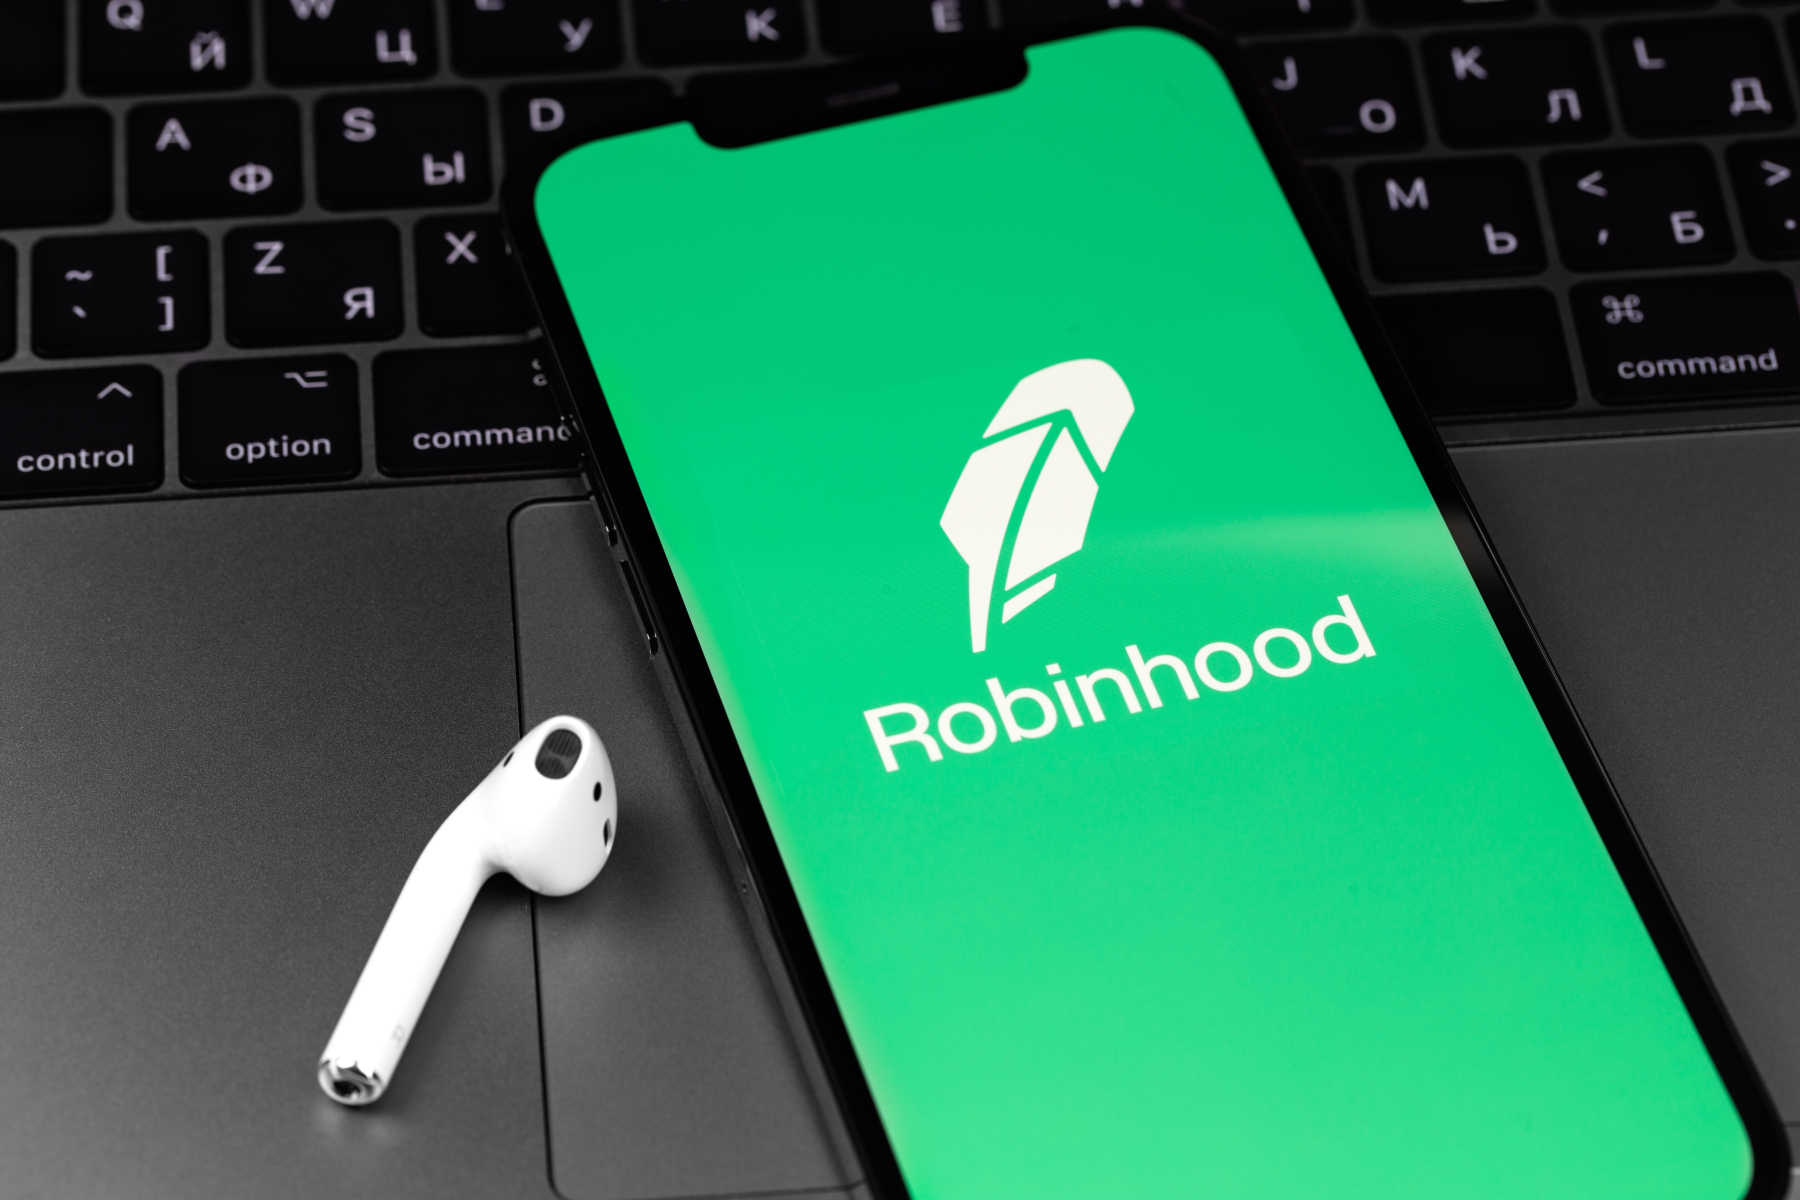 Robinhood Shares Drop 20% After Announcing Binance To Acquire FTX
